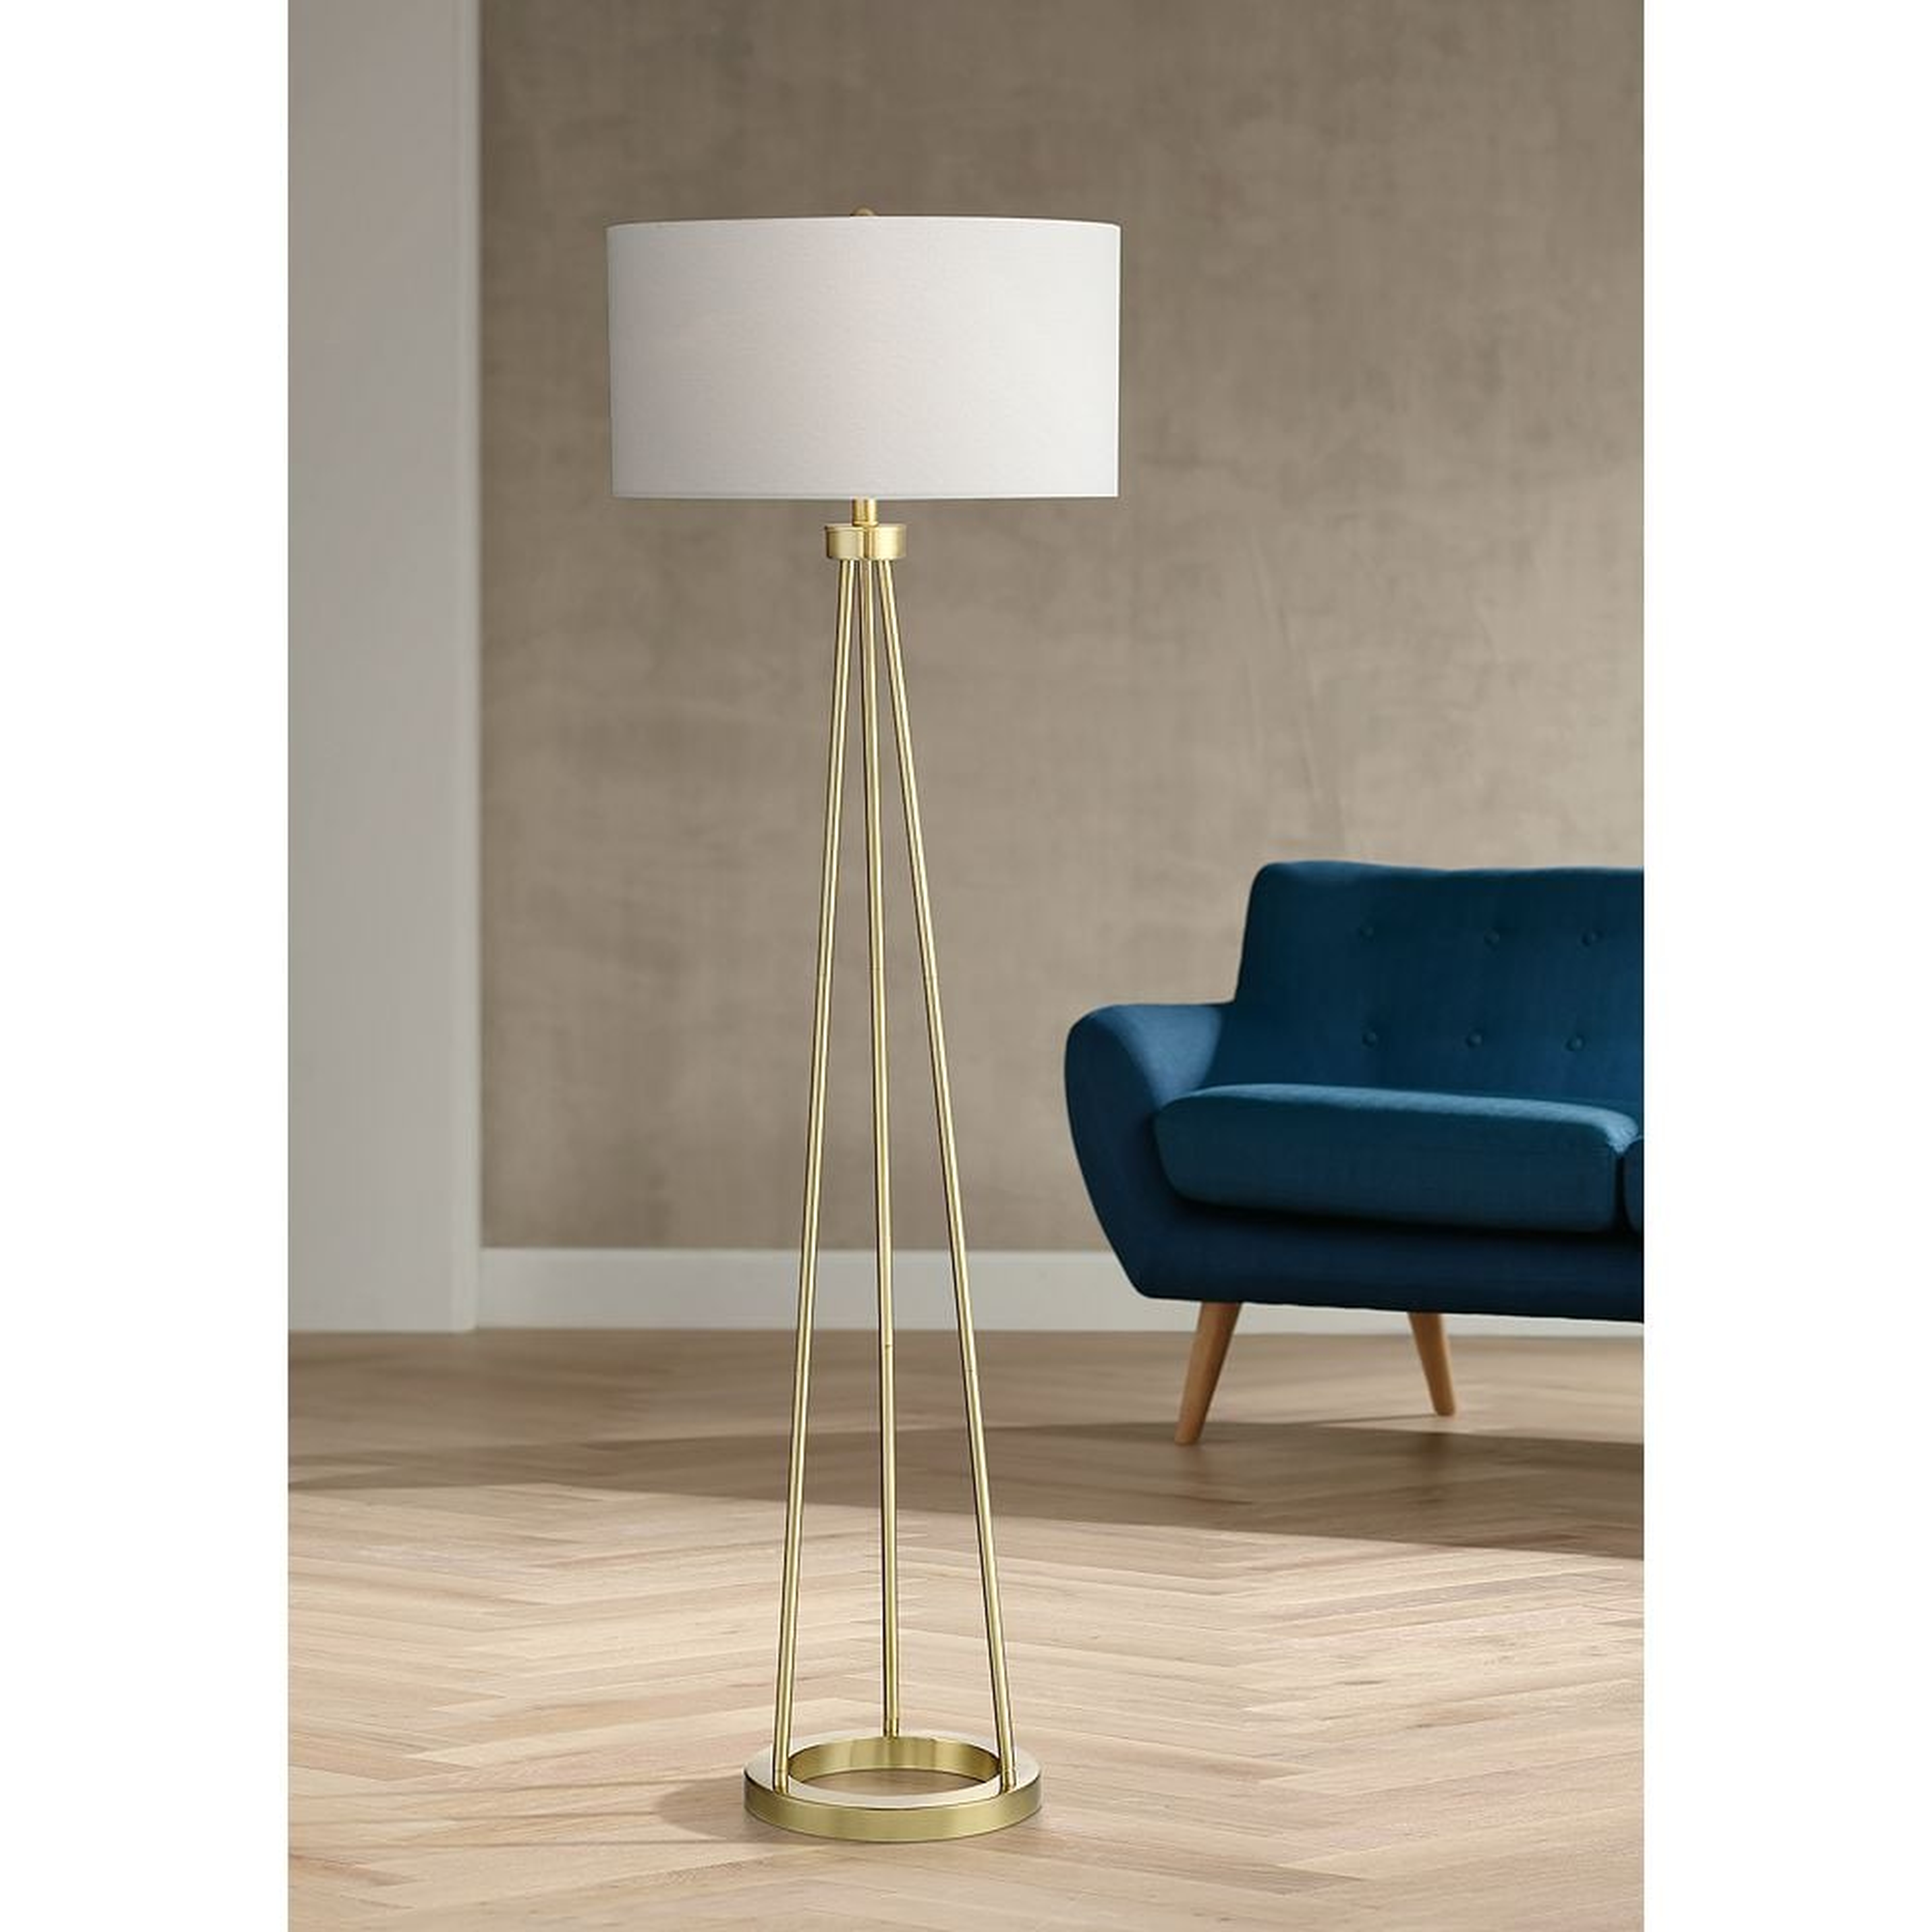 Saxony Brushed Brass Tripod Floor Lamp - Style # 56G91 - Lamps Plus